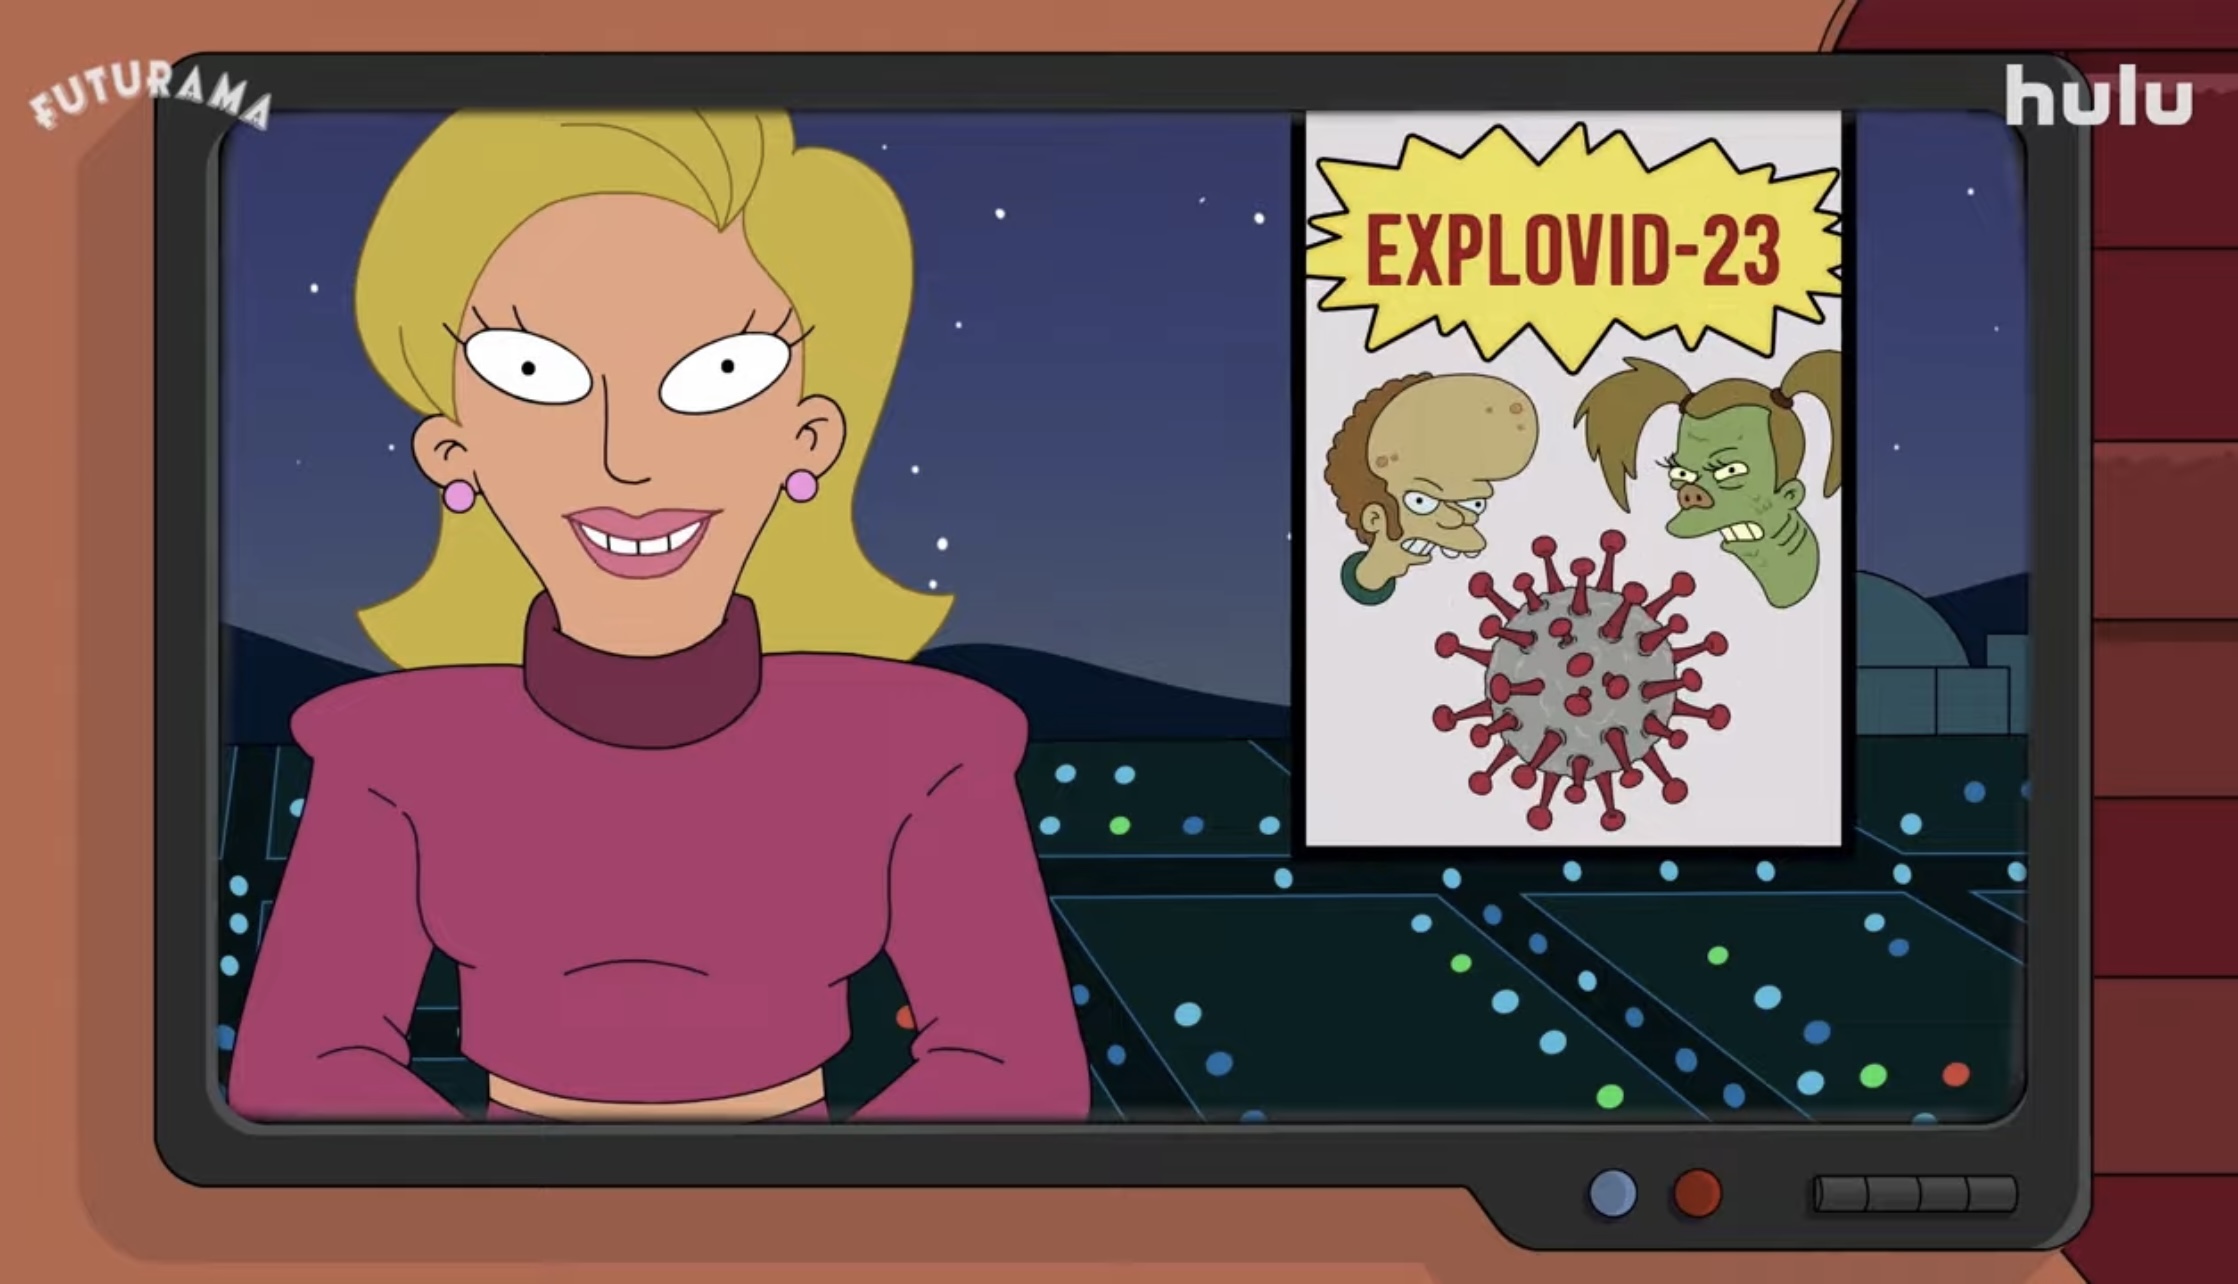 I don't know what Explovid is on Futurama, but that image suggests it's the Mutants' fault. 